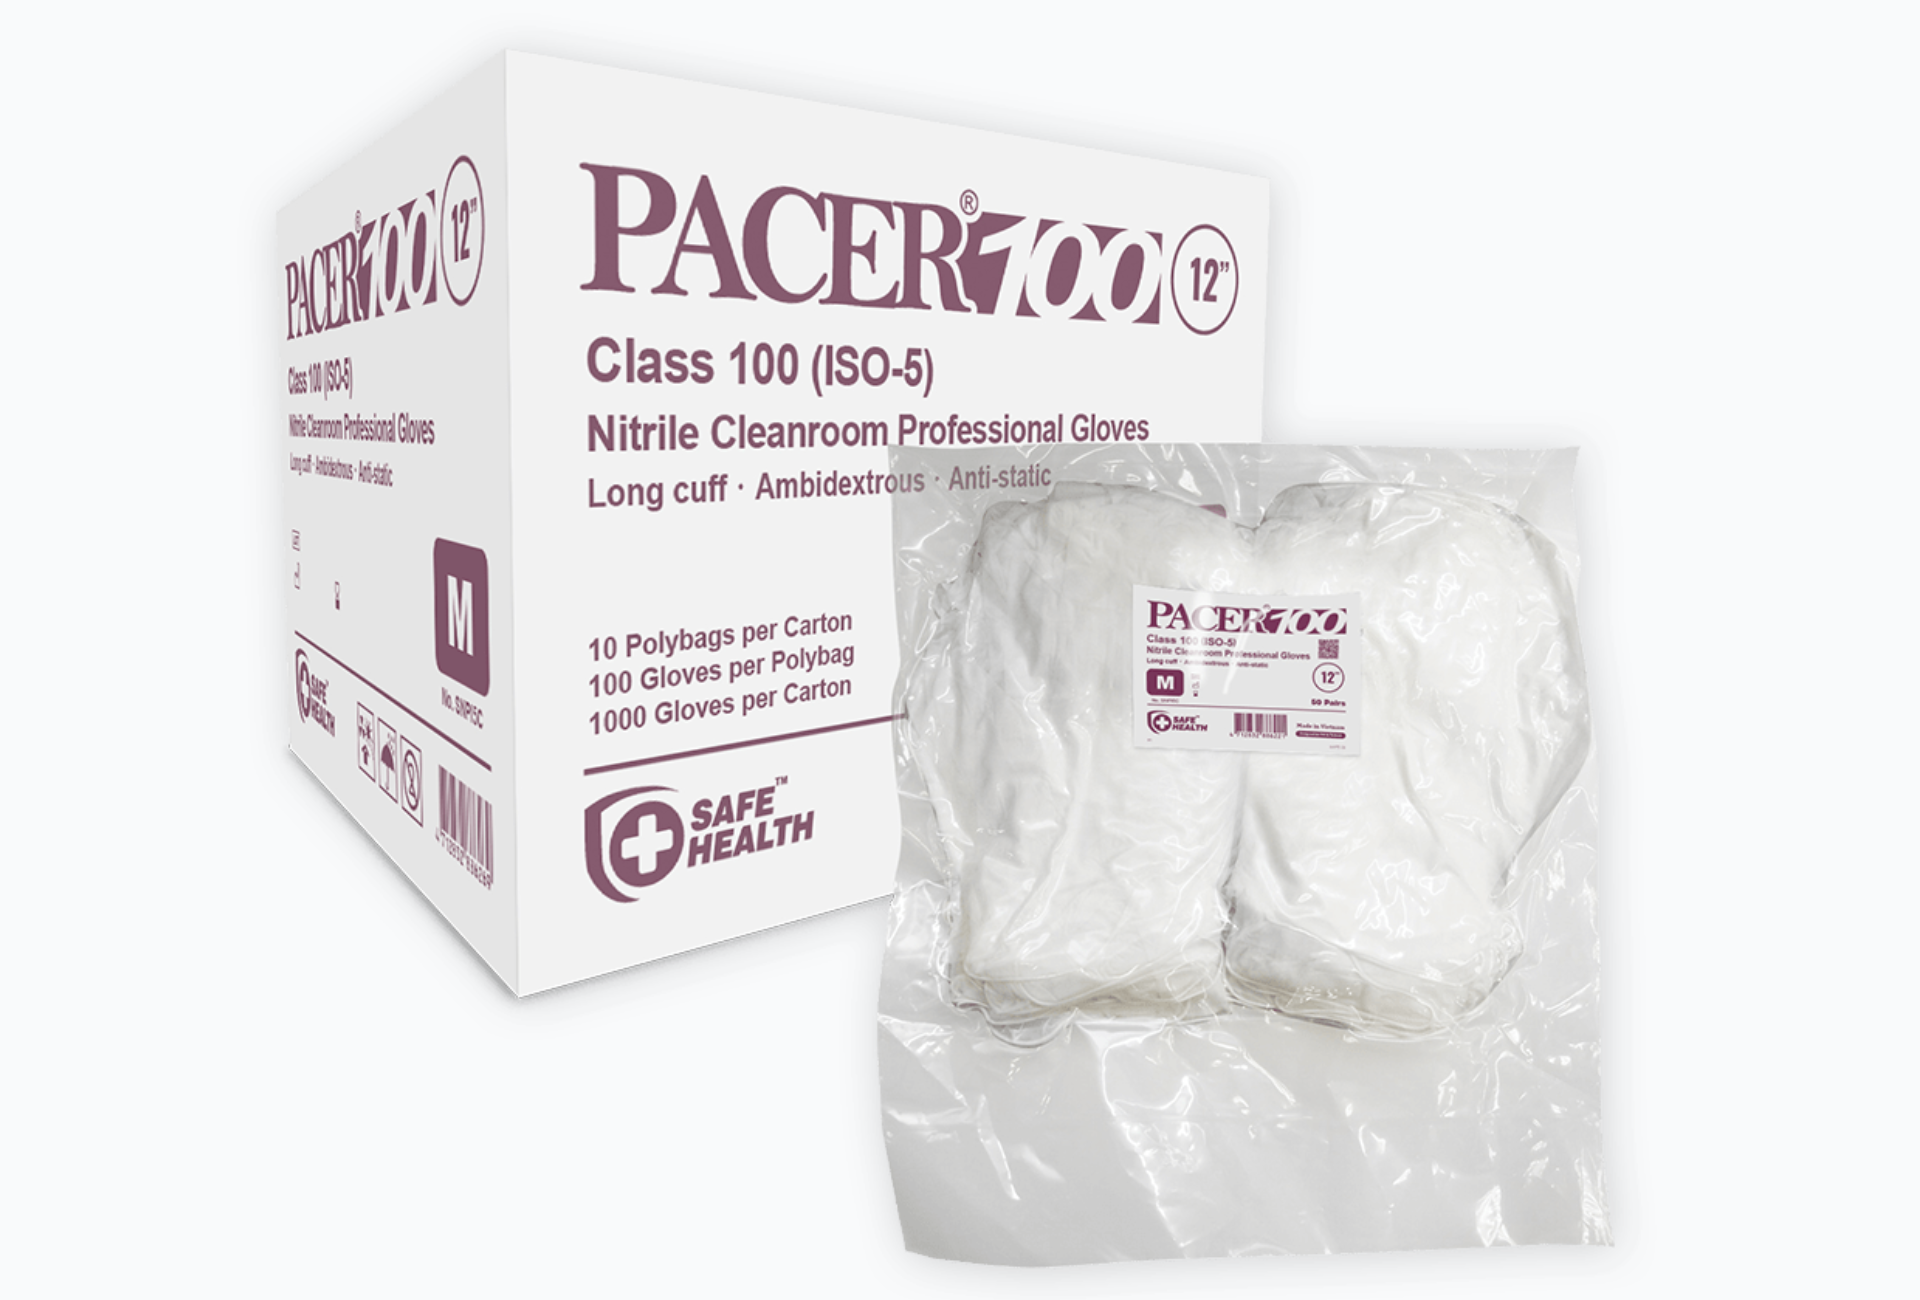 PACER 100<br />
Ultra Nitrile Cleanroom Professional Gloves - Standard Cuff